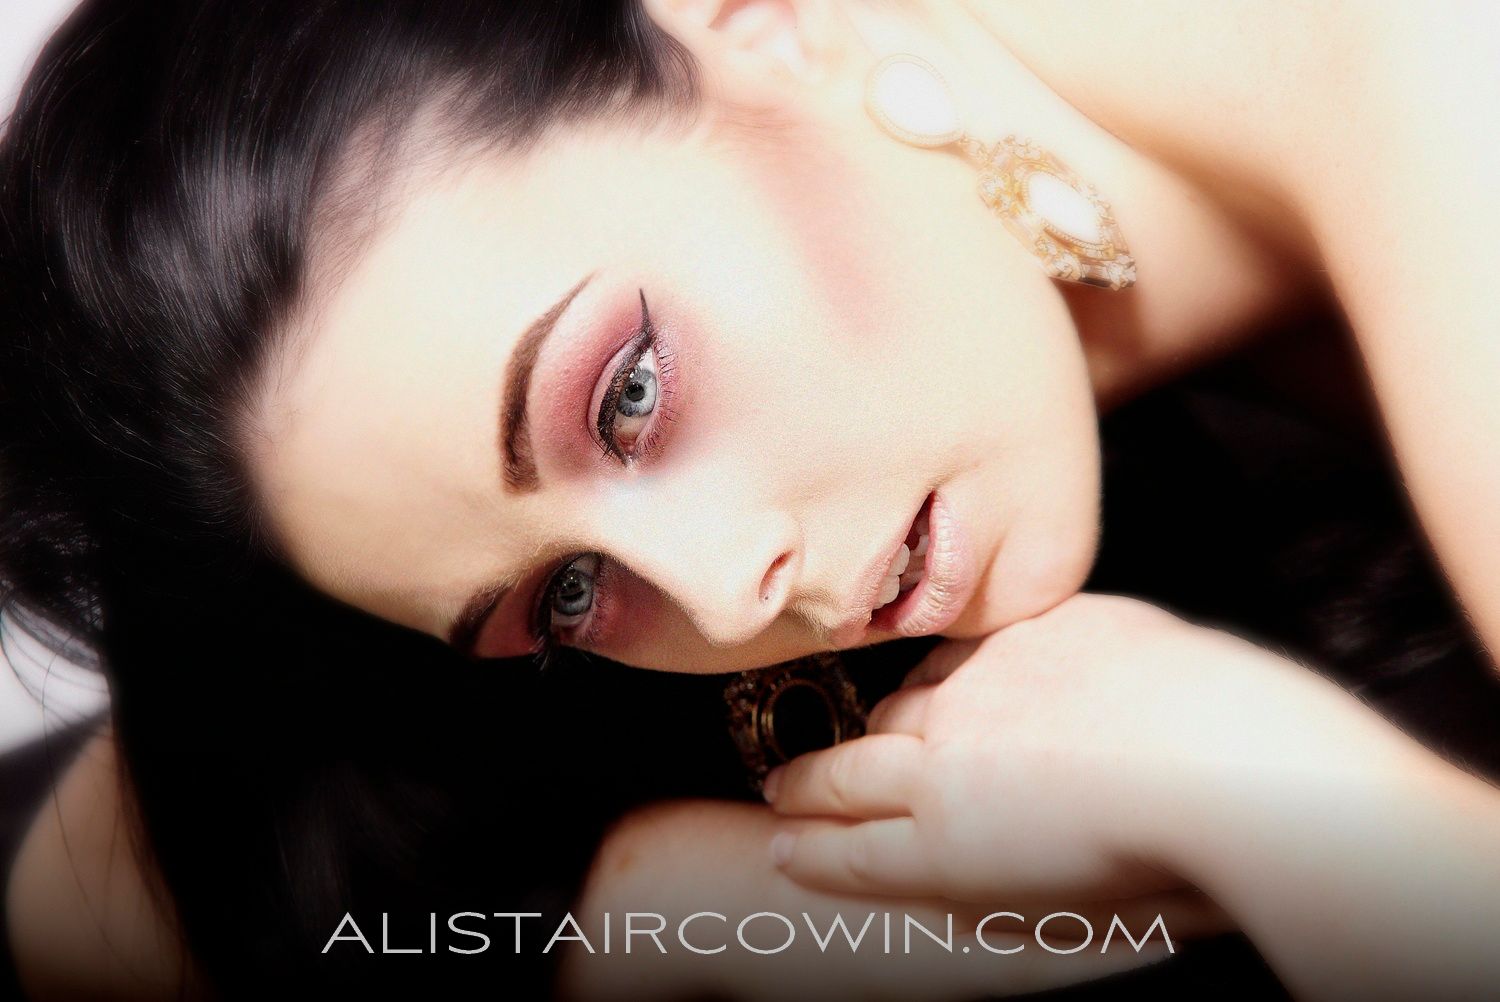 Photographed for Alistair Cowin's Beauty Book and the model's Portfolio<br />
MUA: Hannah Field